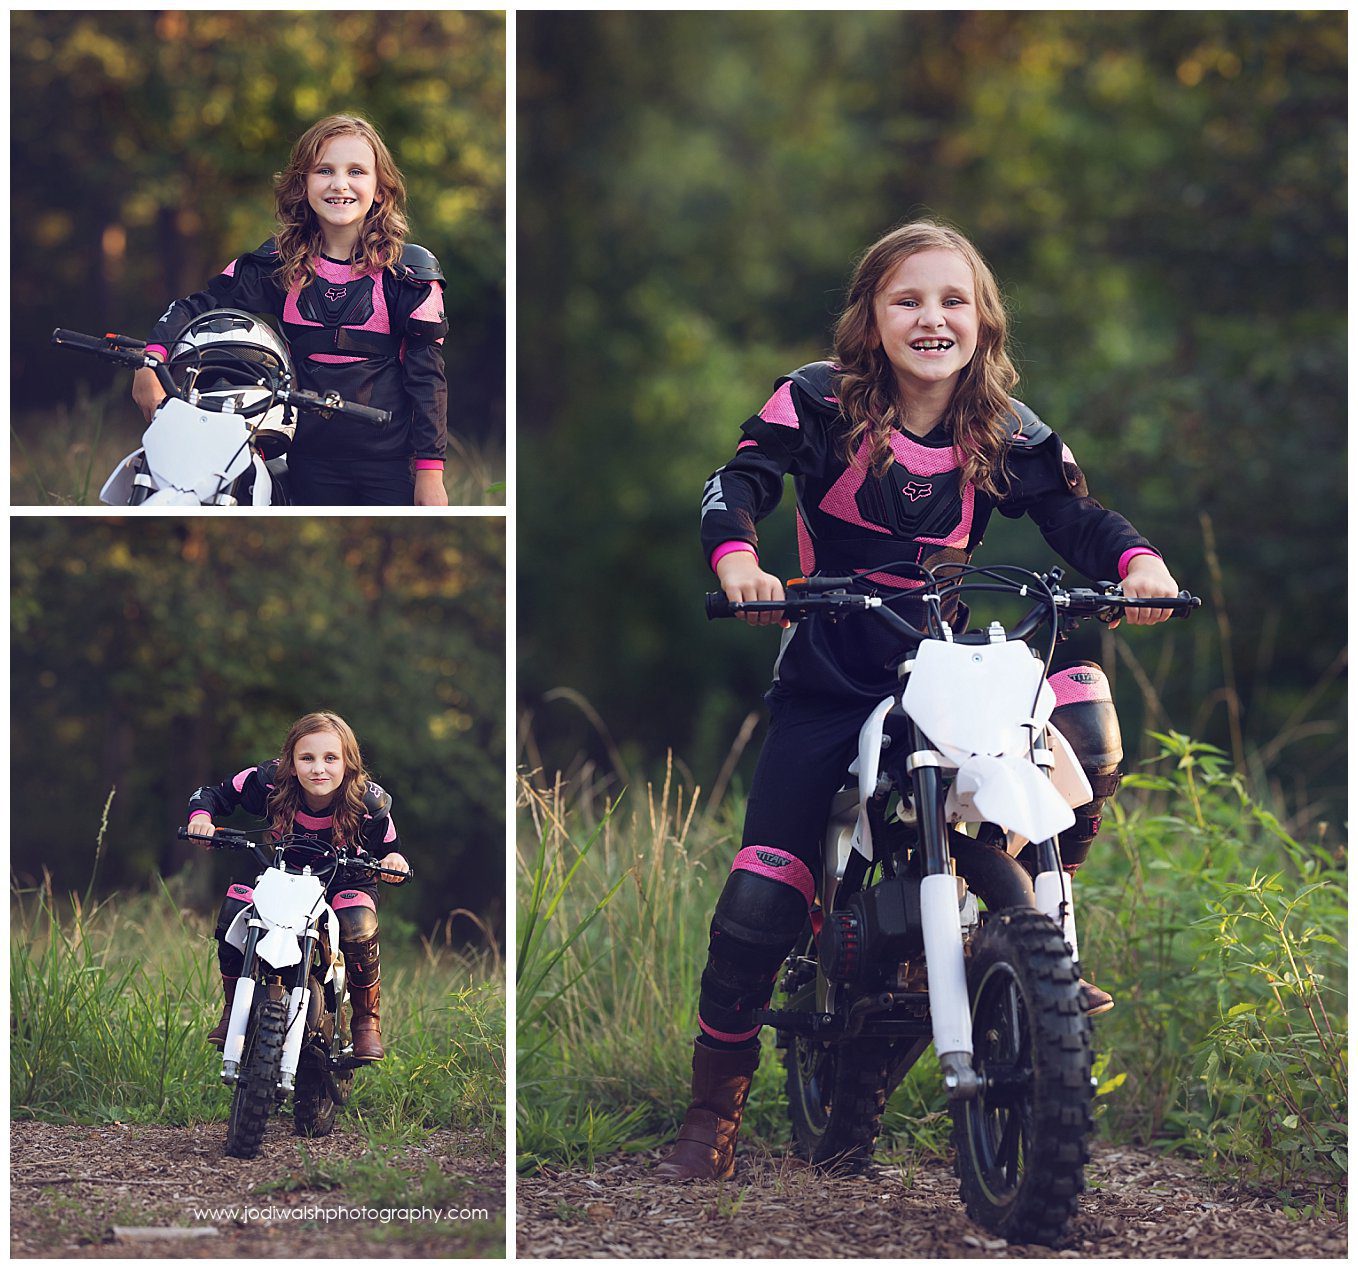 images of little gear wearing black and pink racing gear with her white dirt bike in South Park.  She's standing next to the bike in one image and in the others, she's sitting on the bike.